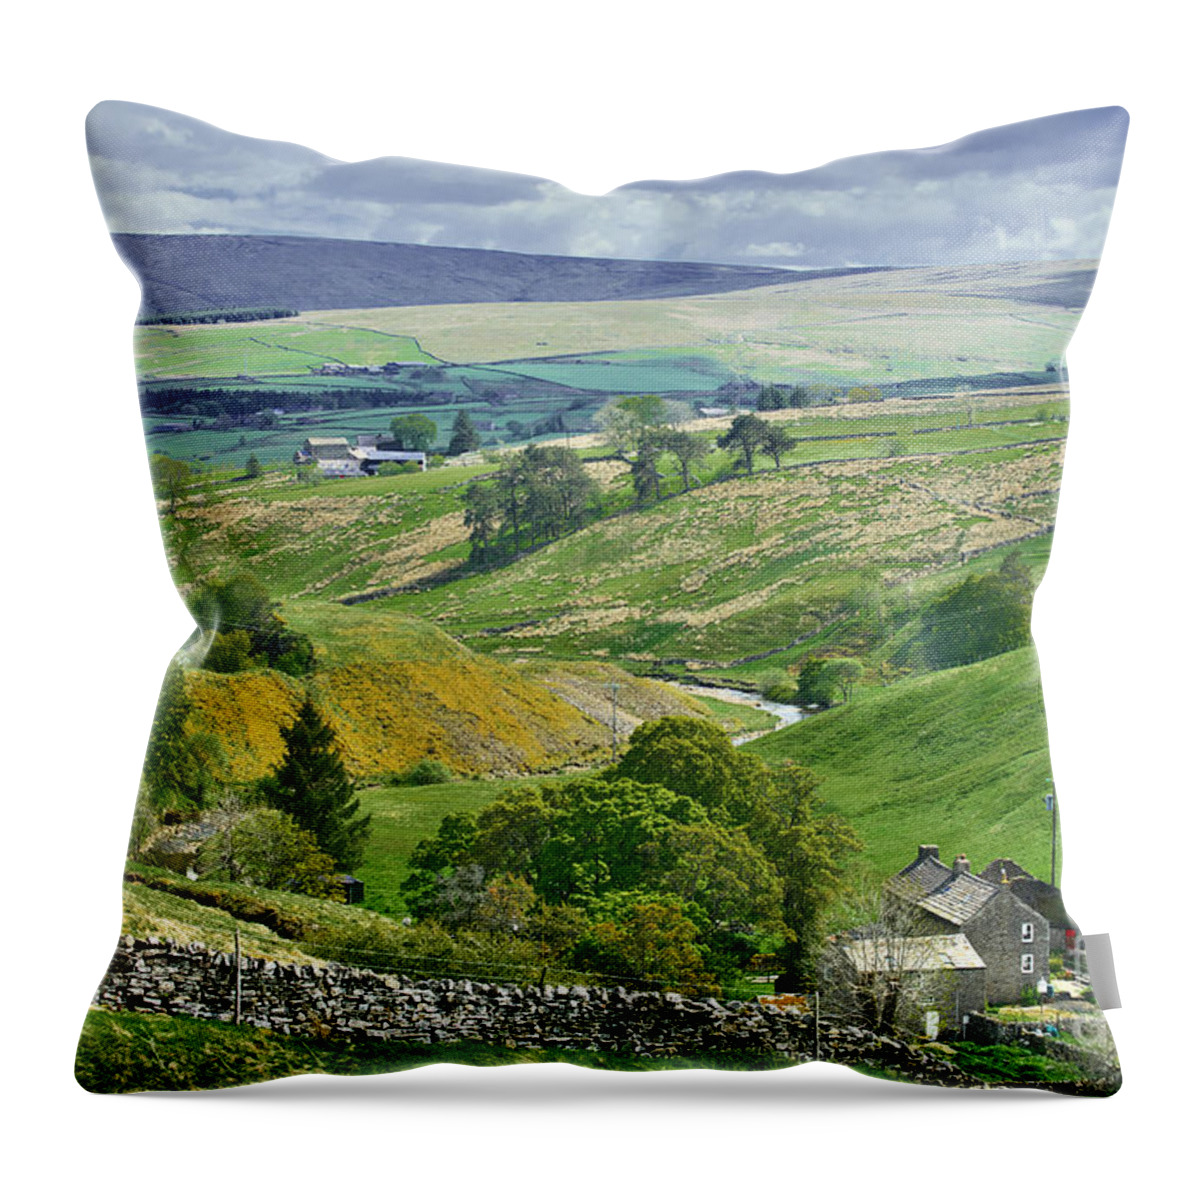 Weardale Countryside Throw Pillow featuring the photograph Durham Dales Countryside - Weardale by Martyn Arnold